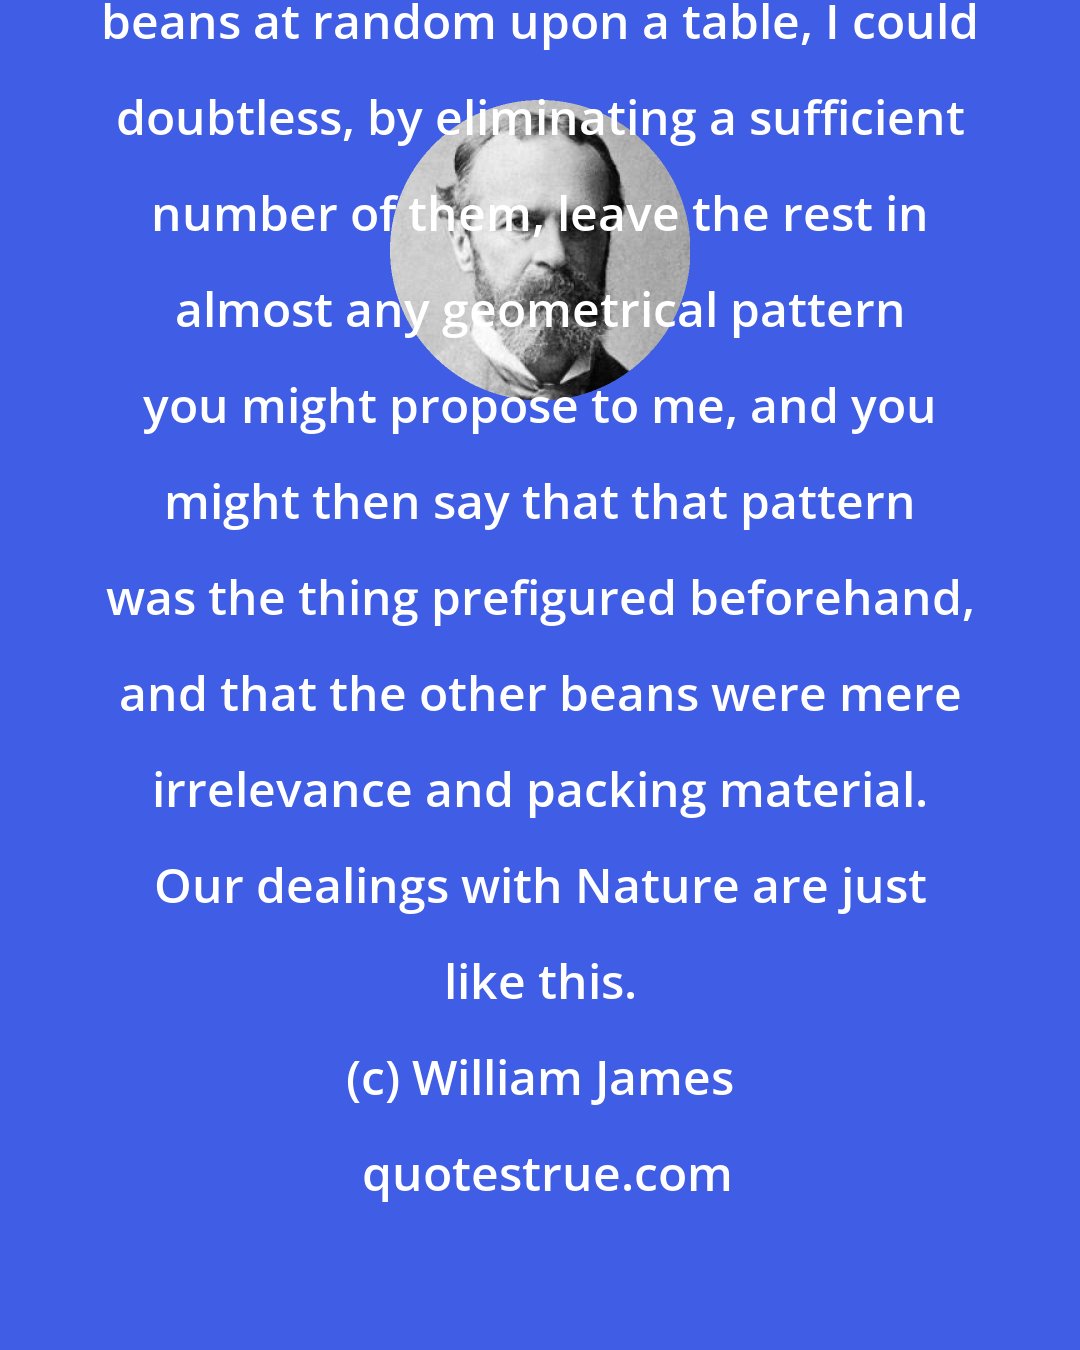 William James: If I should throw down a thousand beans at random upon a table, I could doubtless, by eliminating a sufficient number of them, leave the rest in almost any geometrical pattern you might propose to me, and you might then say that that pattern was the thing prefigured beforehand, and that the other beans were mere irrelevance and packing material. Our dealings with Nature are just like this.